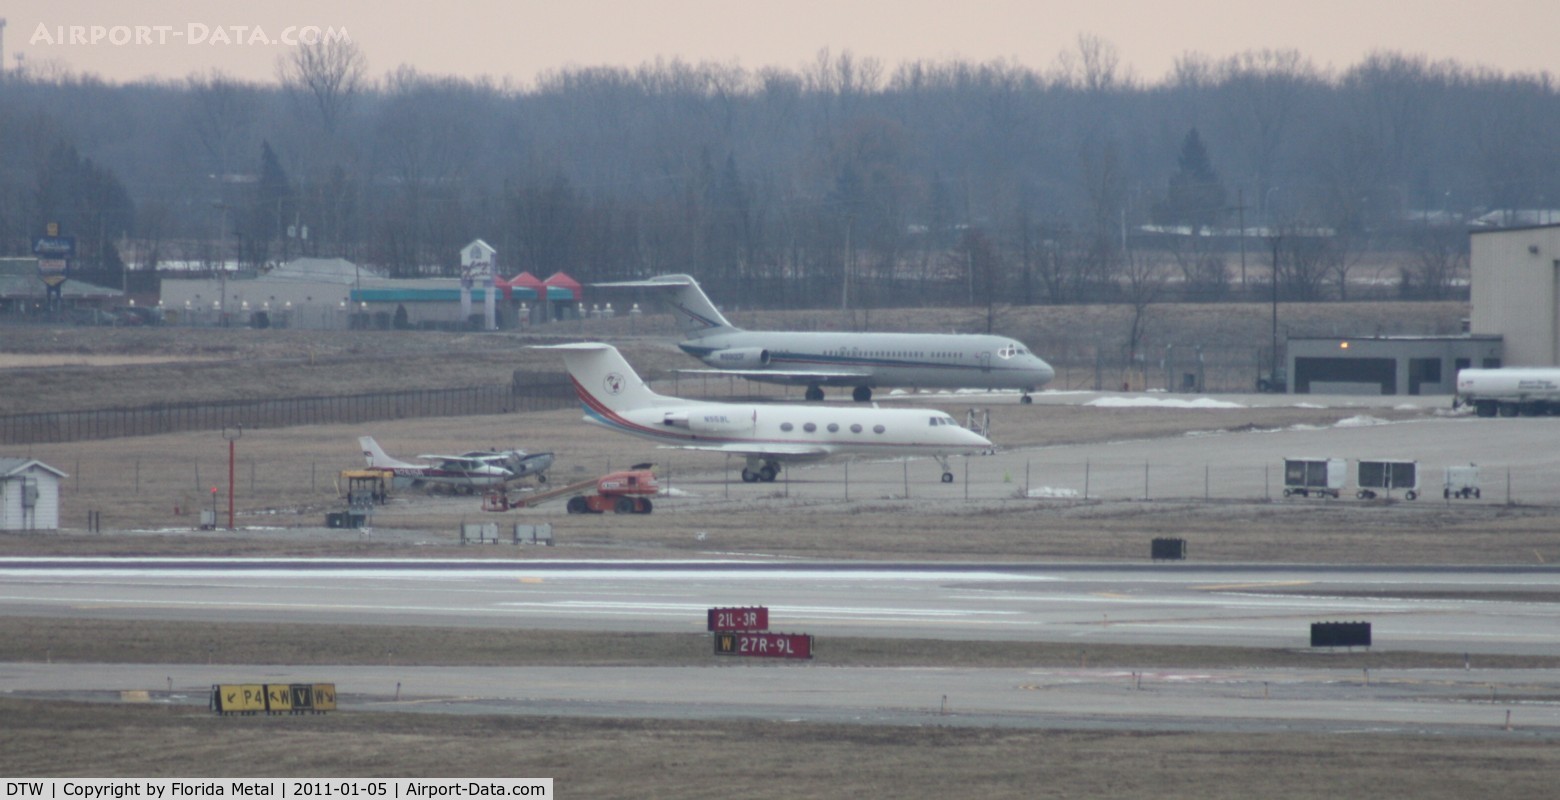 Detroit Metropolitan Wayne County Airport (DTW) - Across the ramp - Little Caesars Gulfstream II, former Detroit Pistons DC-9s, an O-2 that doesn't look flyable and a Cessna 172 - oh yeah and behind that 